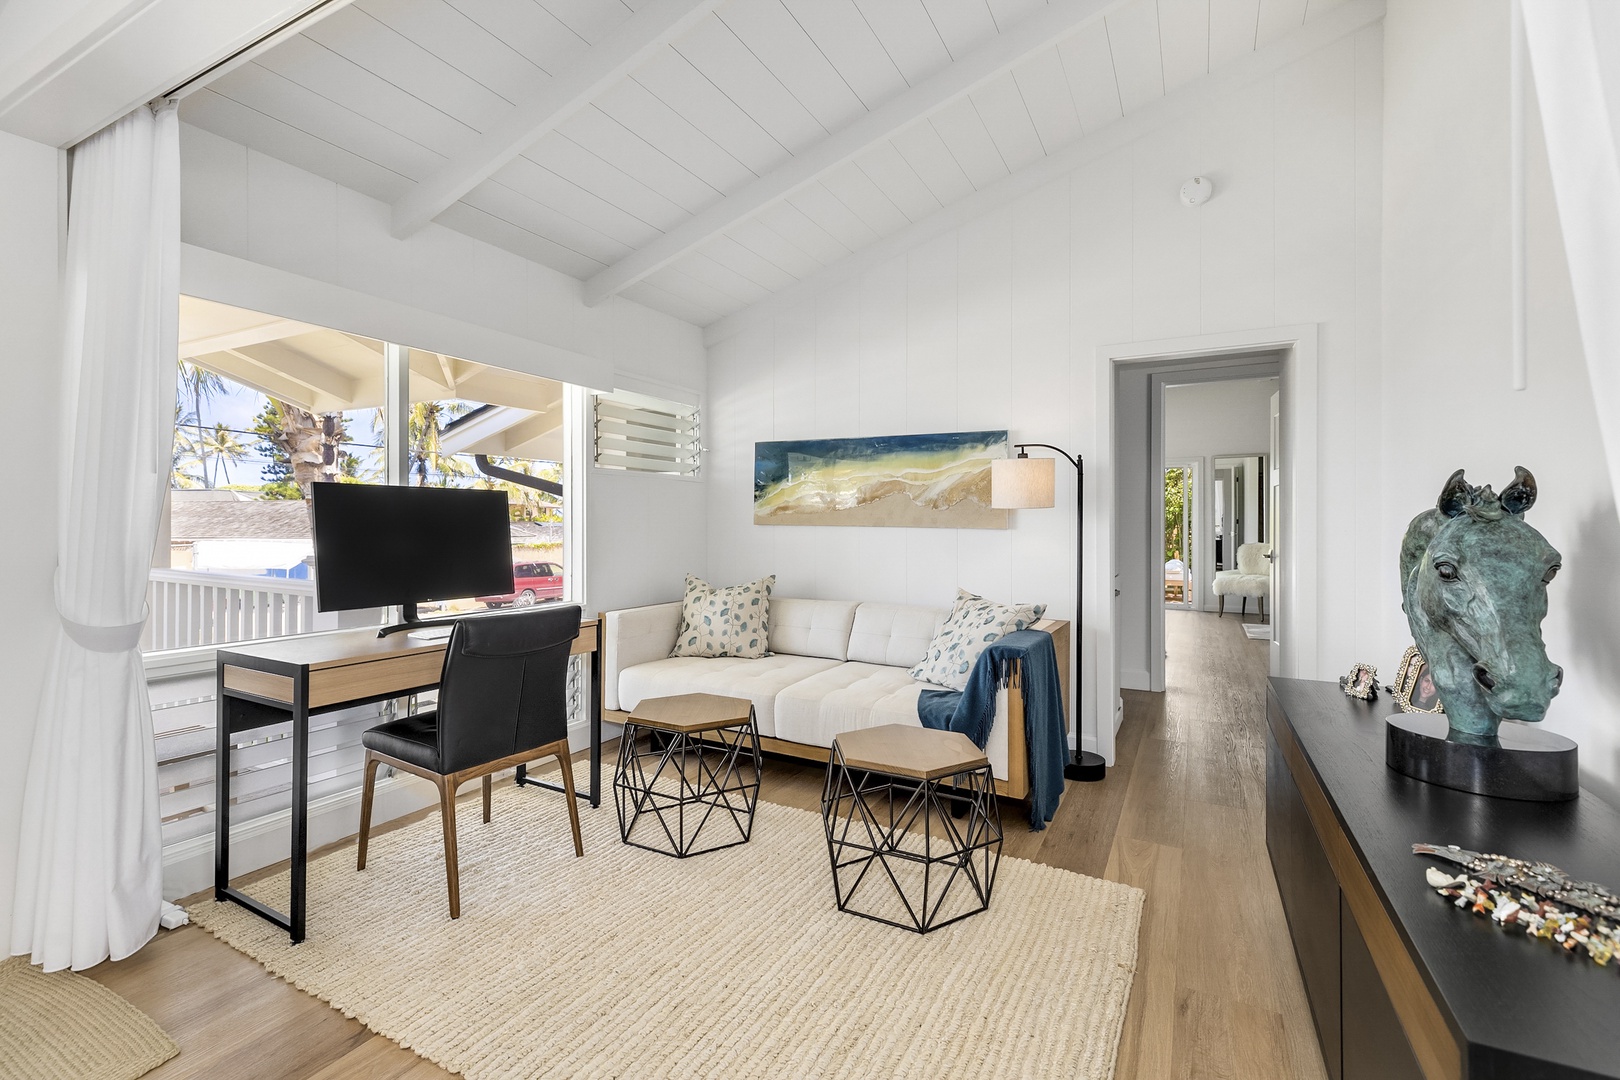 Kailua Vacation Rentals, Ranch Beach Estate - Stylish home office space complemented by a cozy lounge area.